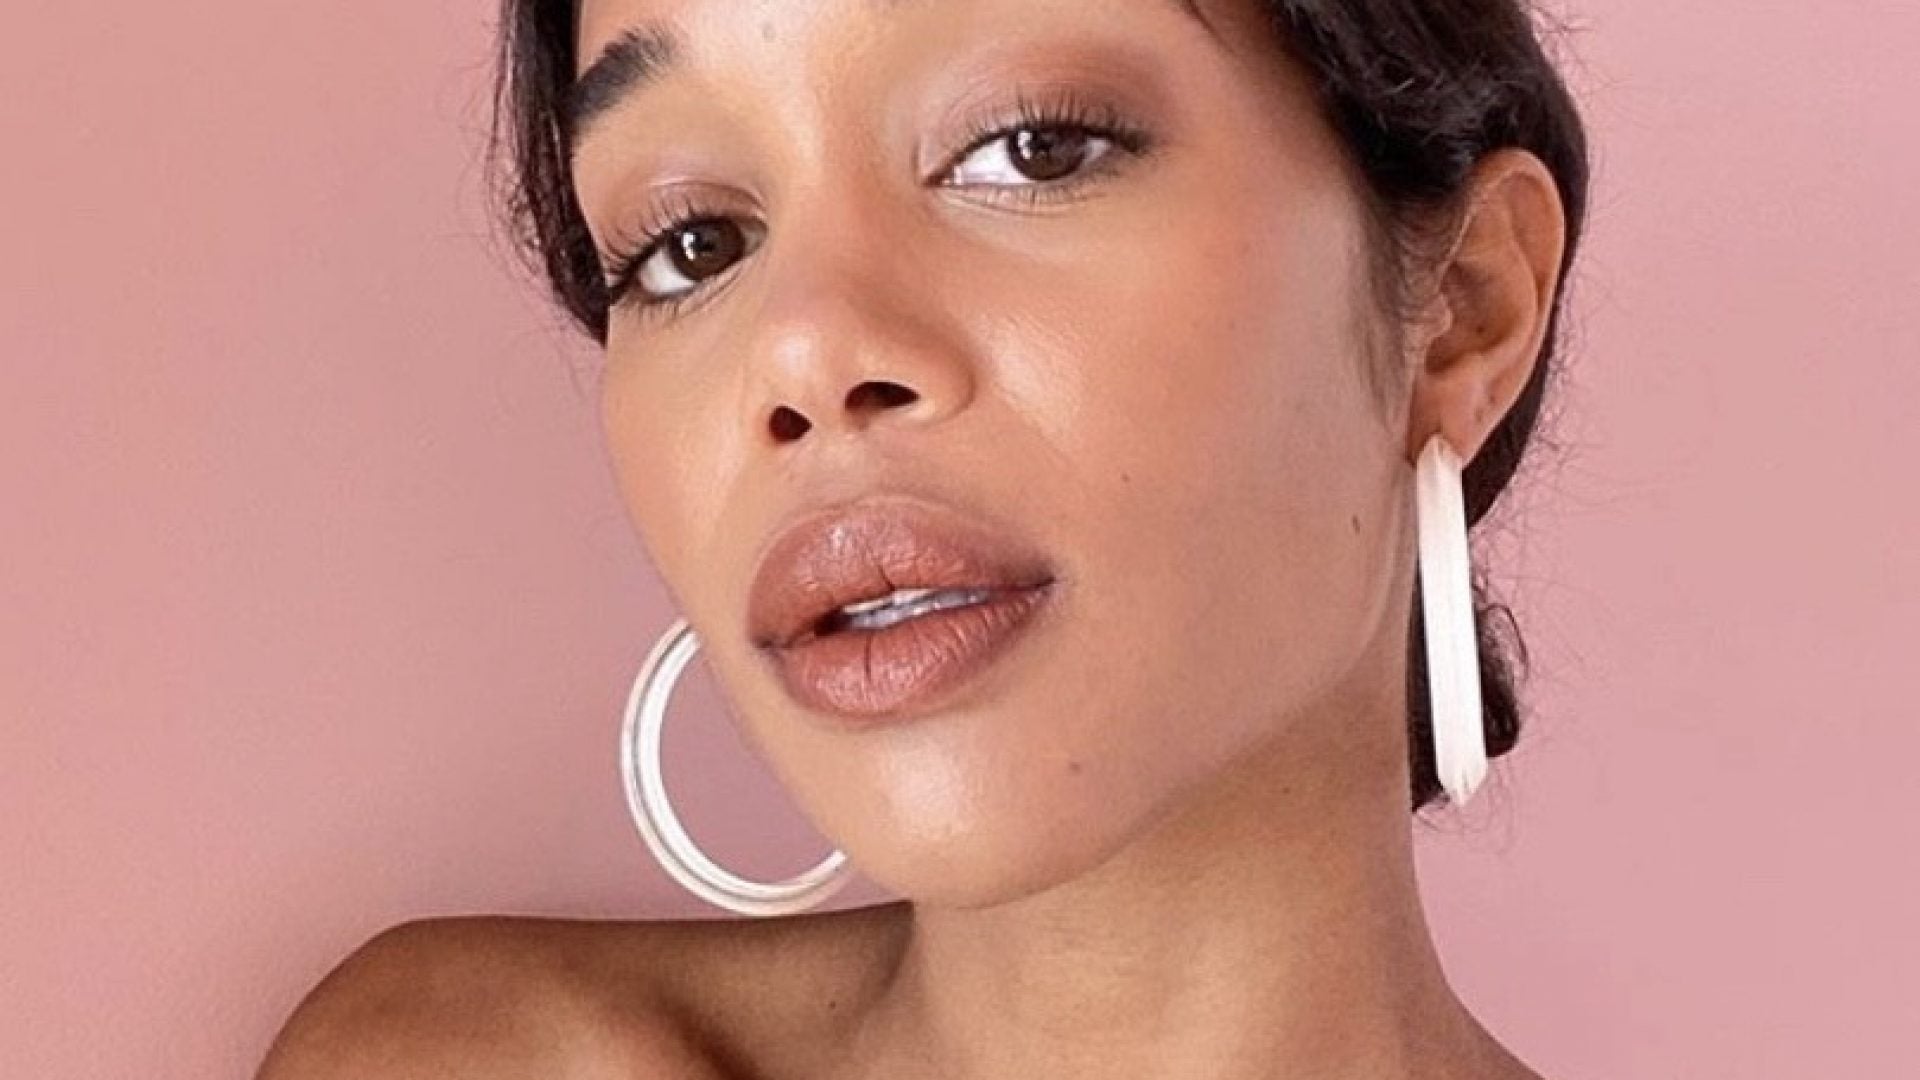 Laura Harrier Reveals The Secrets To Her Flawless Skin